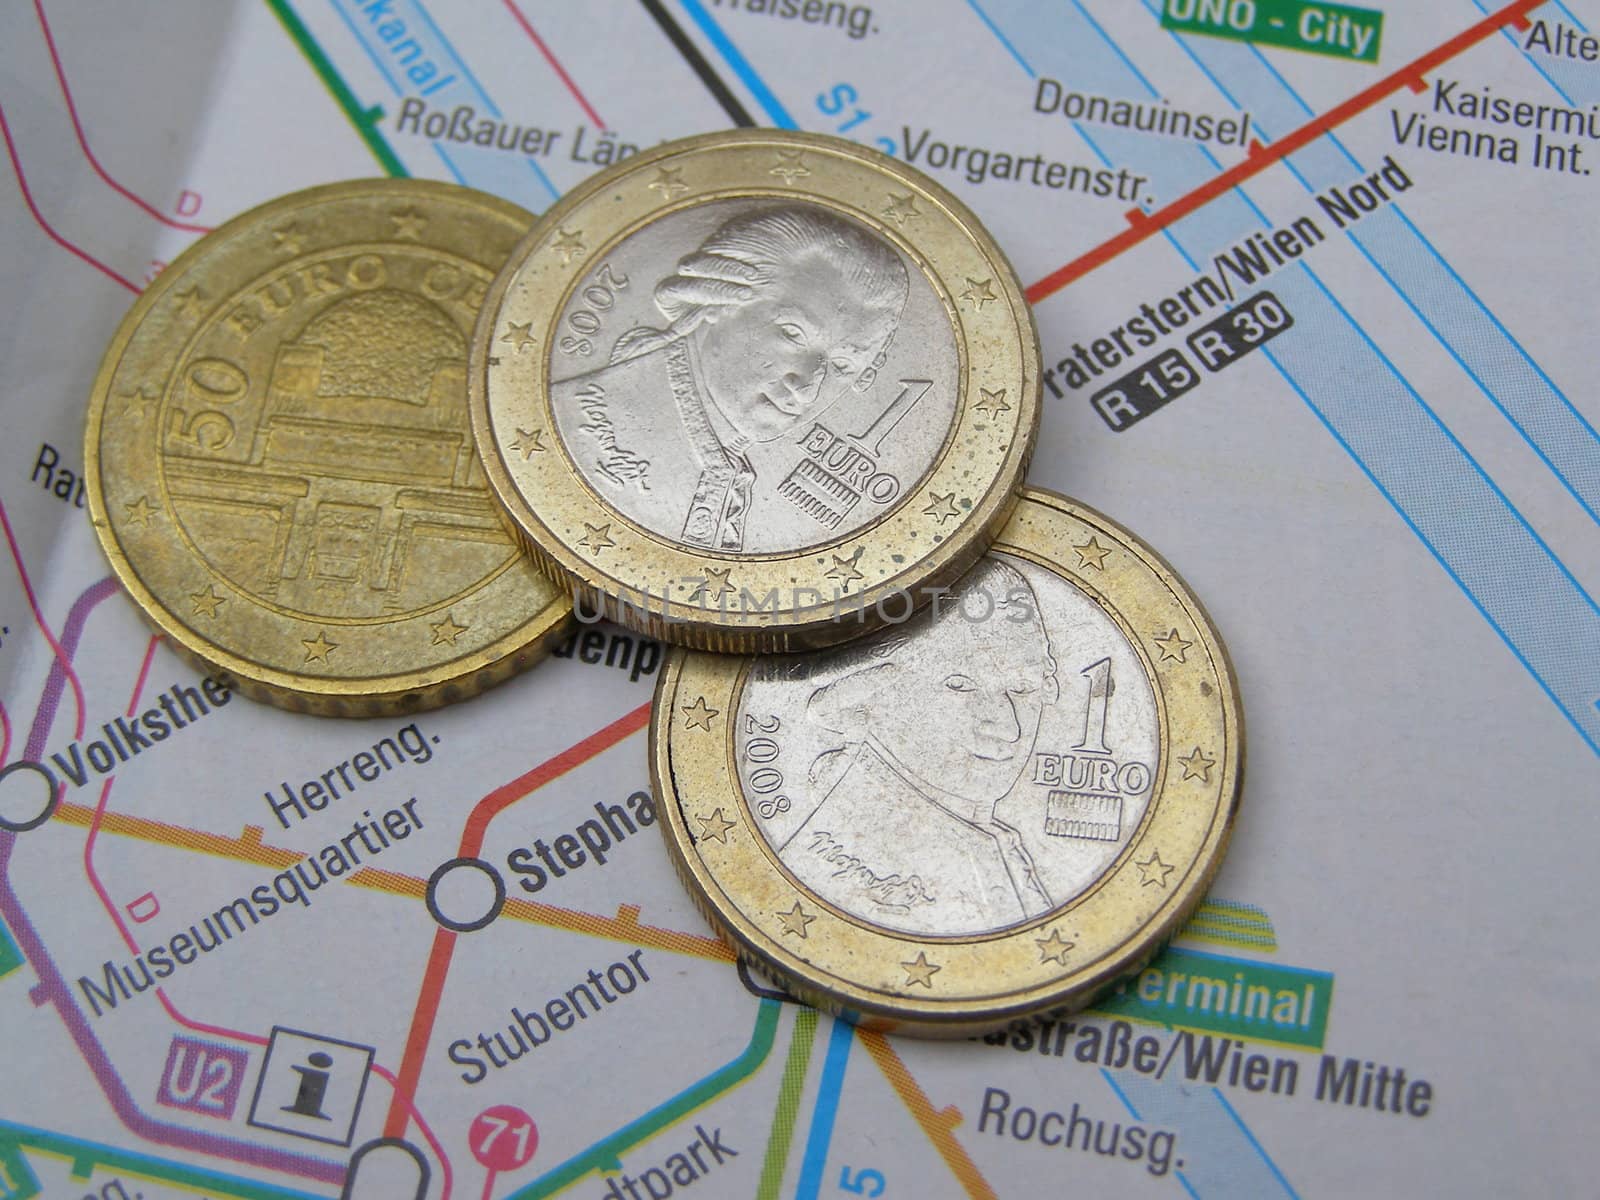 euro coins over Vienna map by paolo77